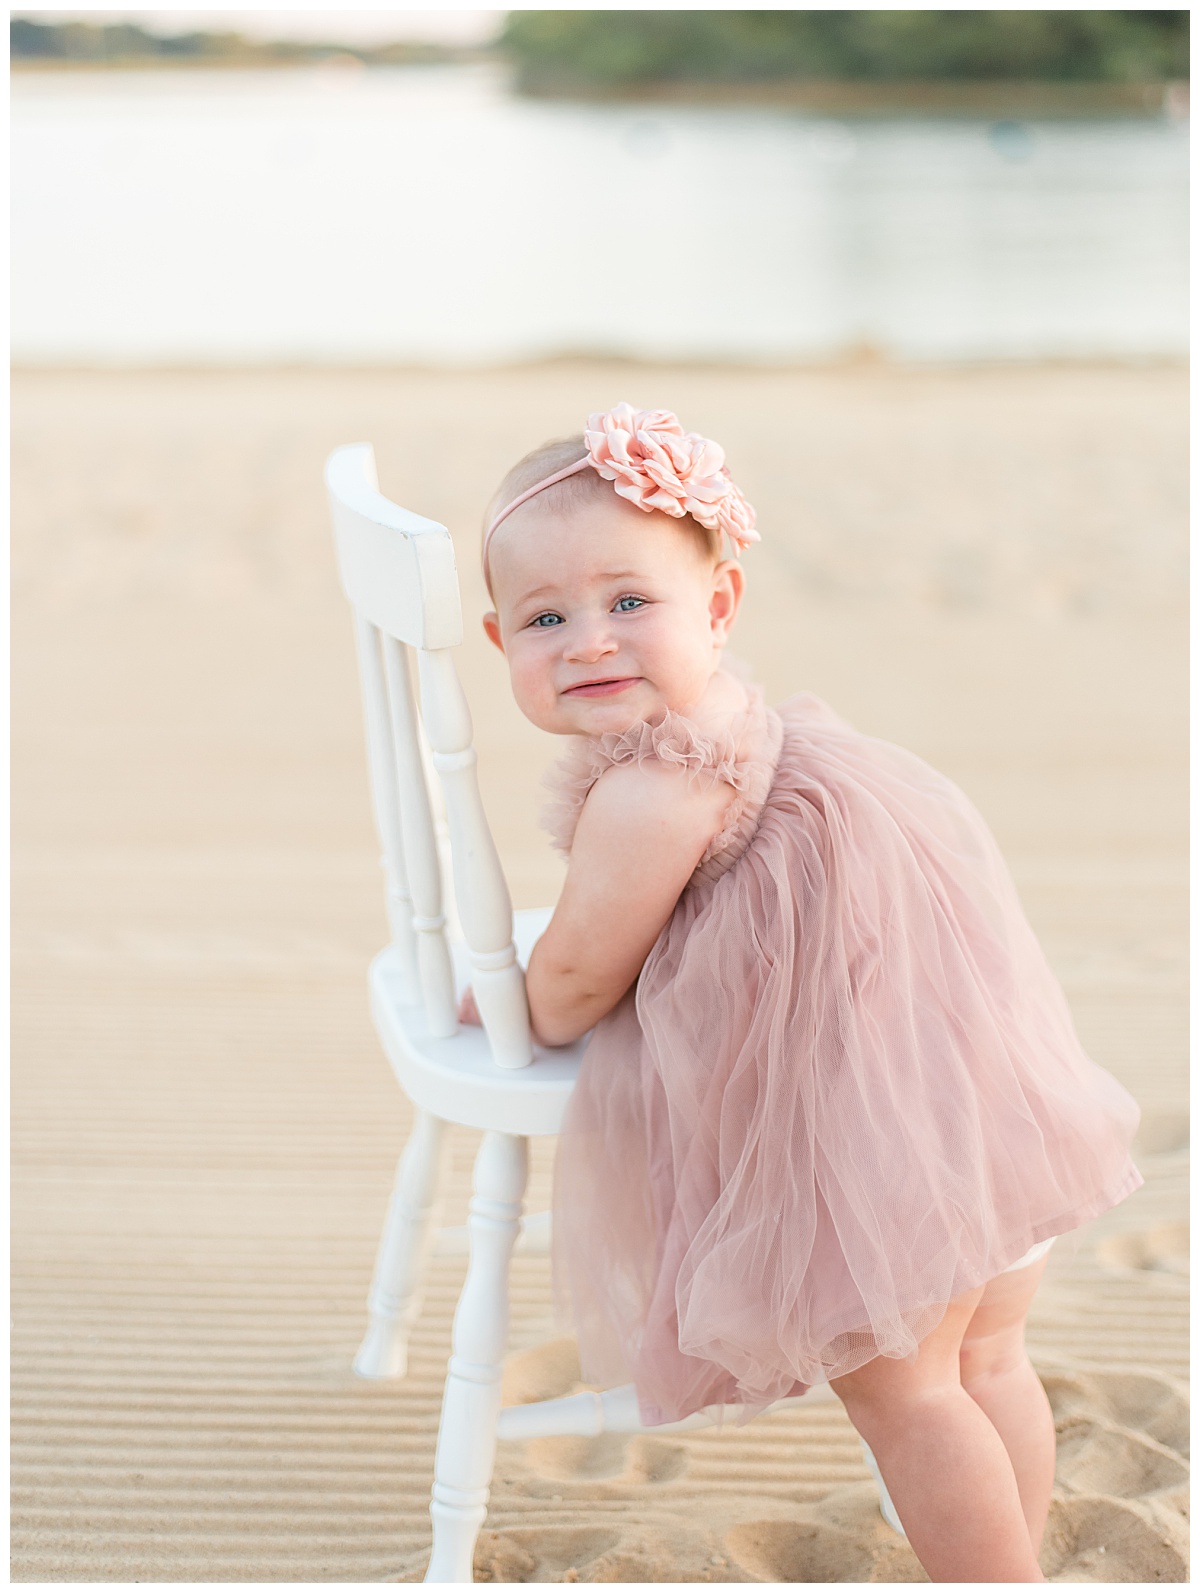 One year old girl leaning on a white chair on the beach for her cake smash pictures in North Dallas by Lindsey Dutton Photography, a Dallas Cake Smash Photographer. 